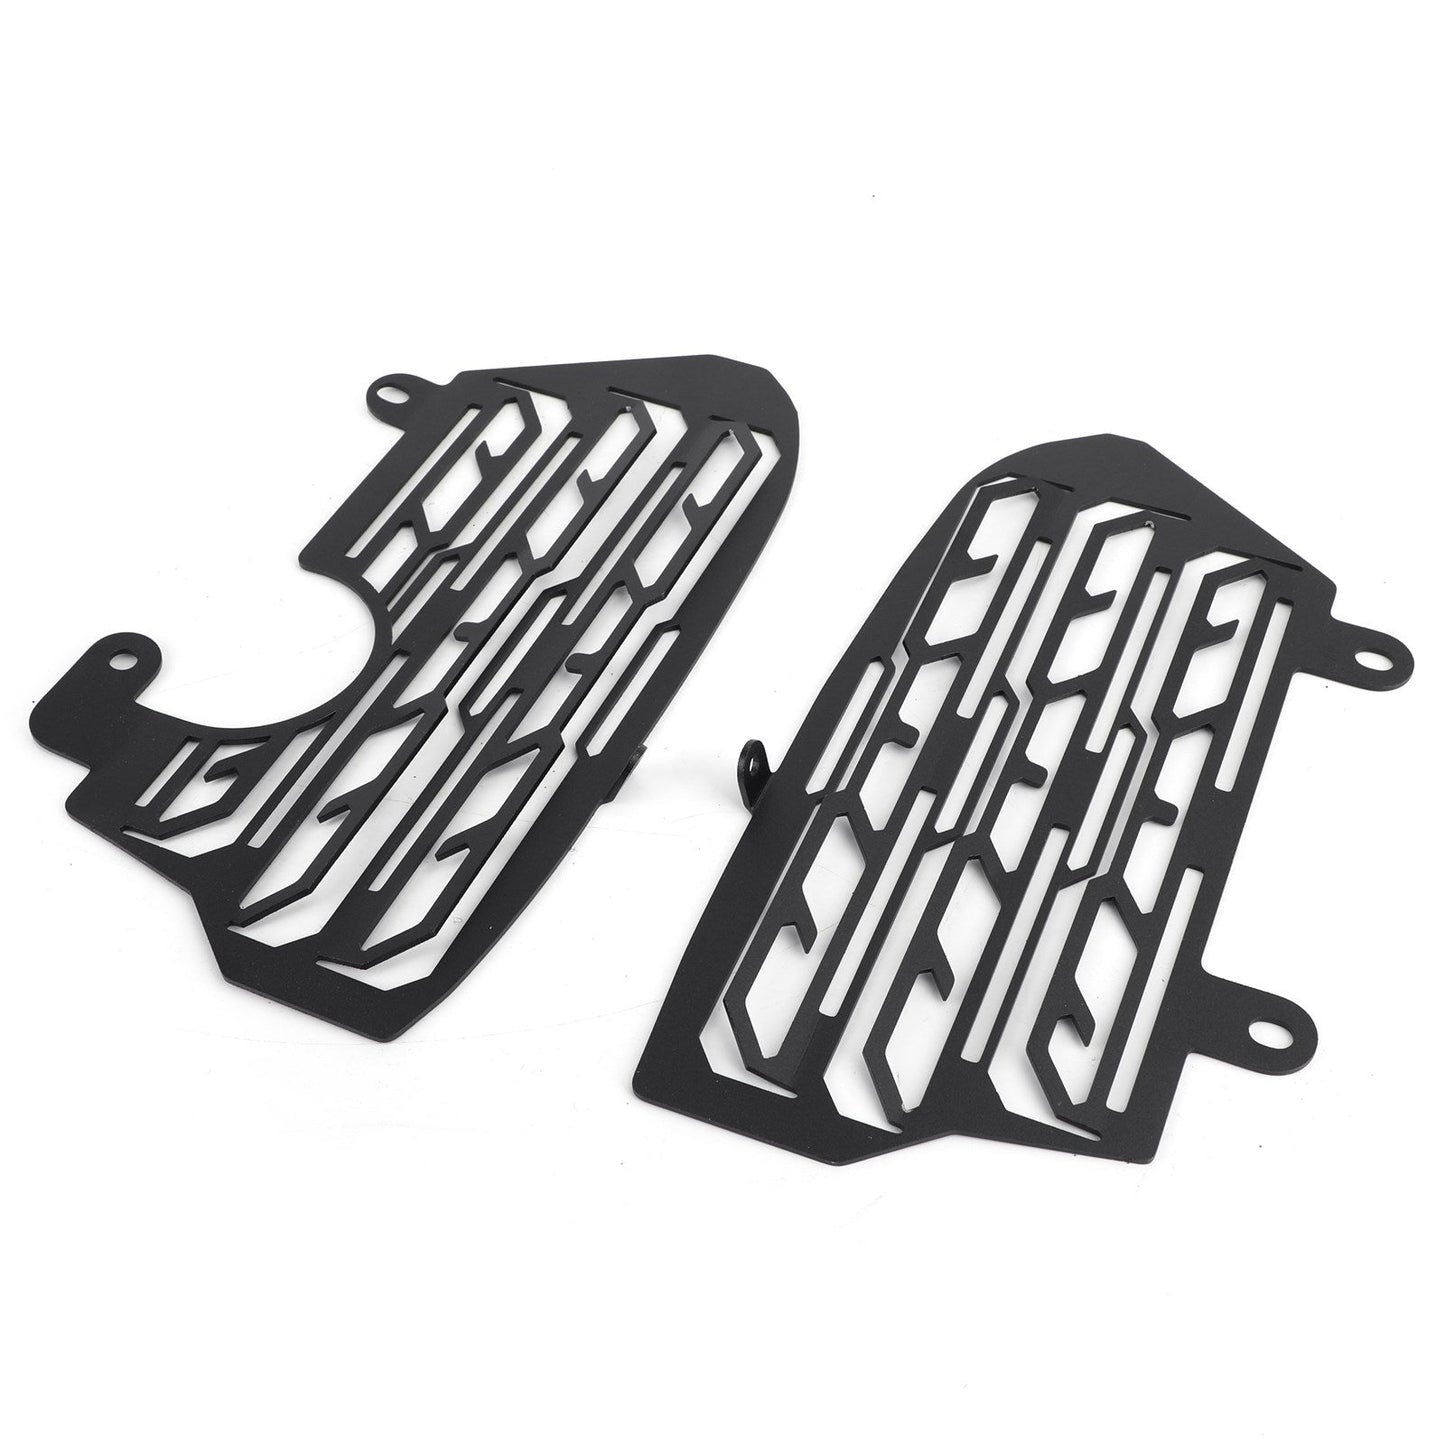 Radiator Guard Grill Cover Aluminum Protector for Honda CRF1000L Africa Twin / ADV Sports 2016-2019